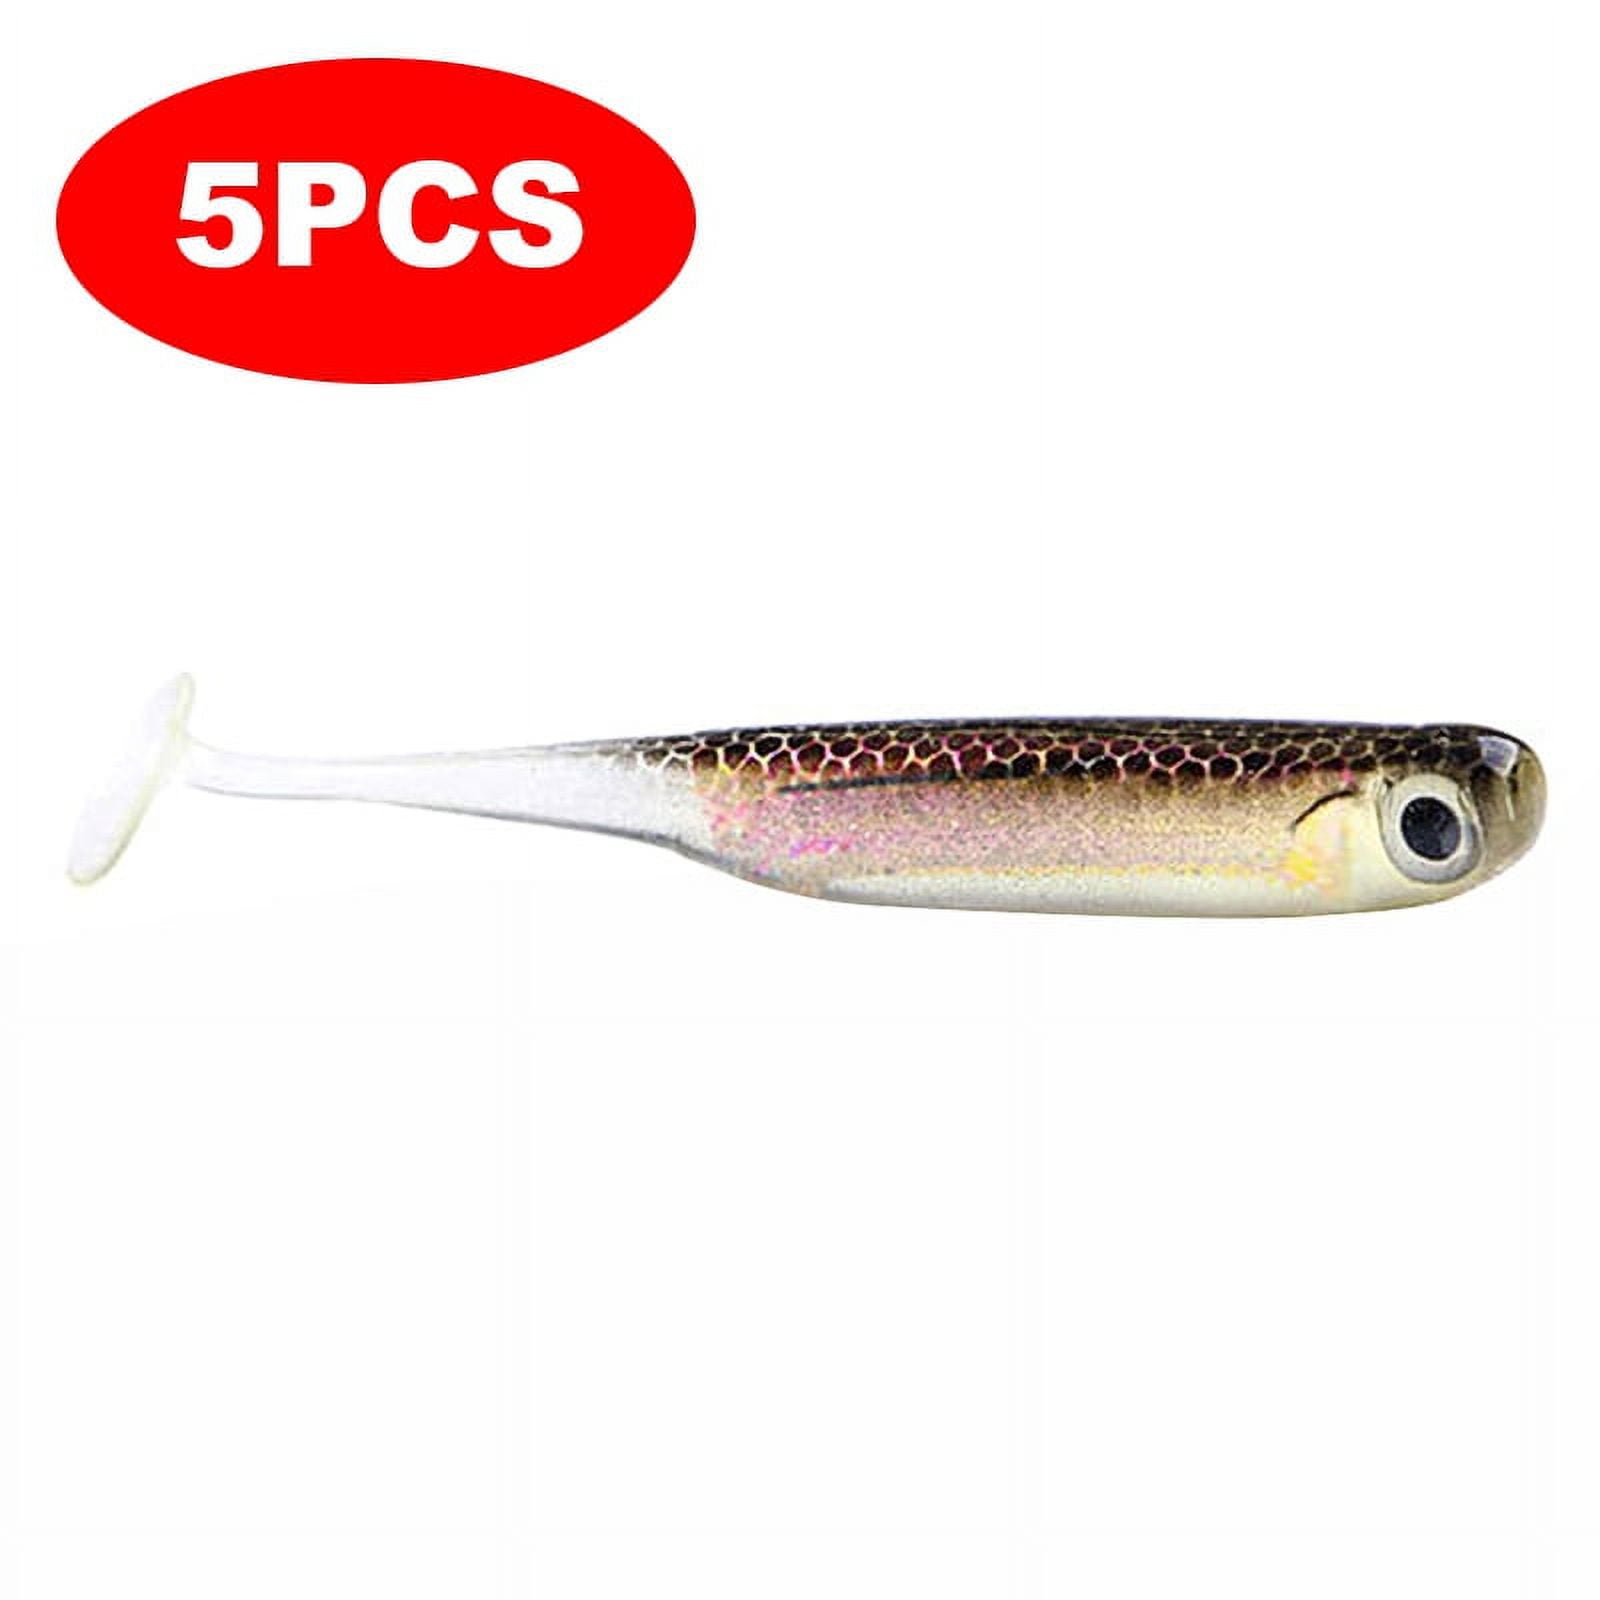 NOEBY 6pcs/lot Soft Lure 75mm/2.5g T- Fishing Lures Soft Worm Japan Shad  Swimbait Jig Head Fly Fishing Silicon Rubber Fish : NW208, 1pack 6pcs :  : Sports, Fitness & Outdoors